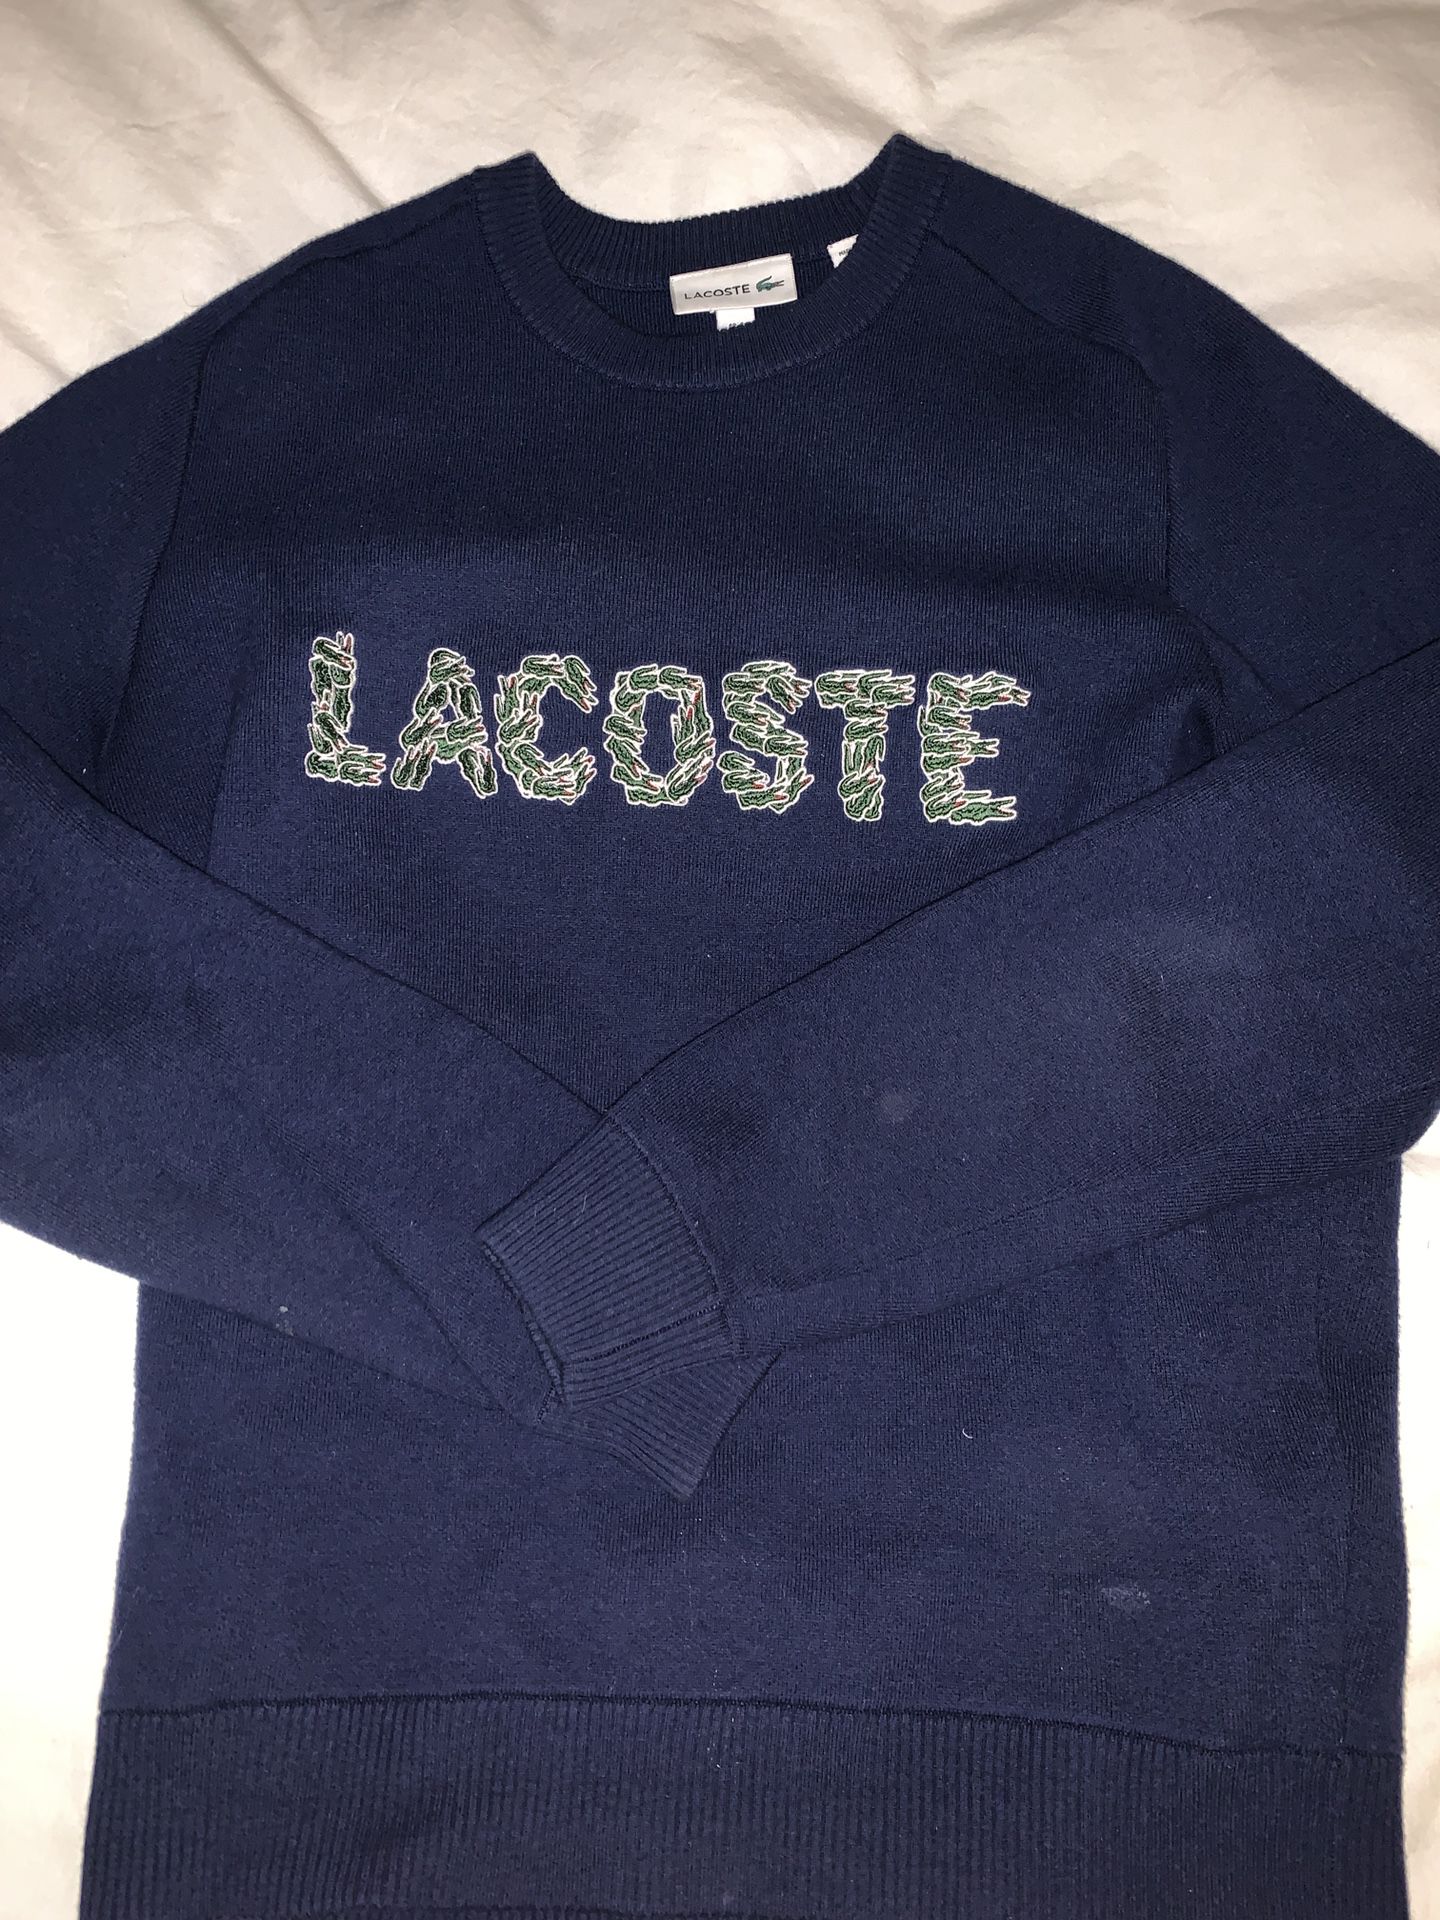 Advarsel Mantle Svin Lacoste Rare Sweater for Sale in New York, NY - OfferUp